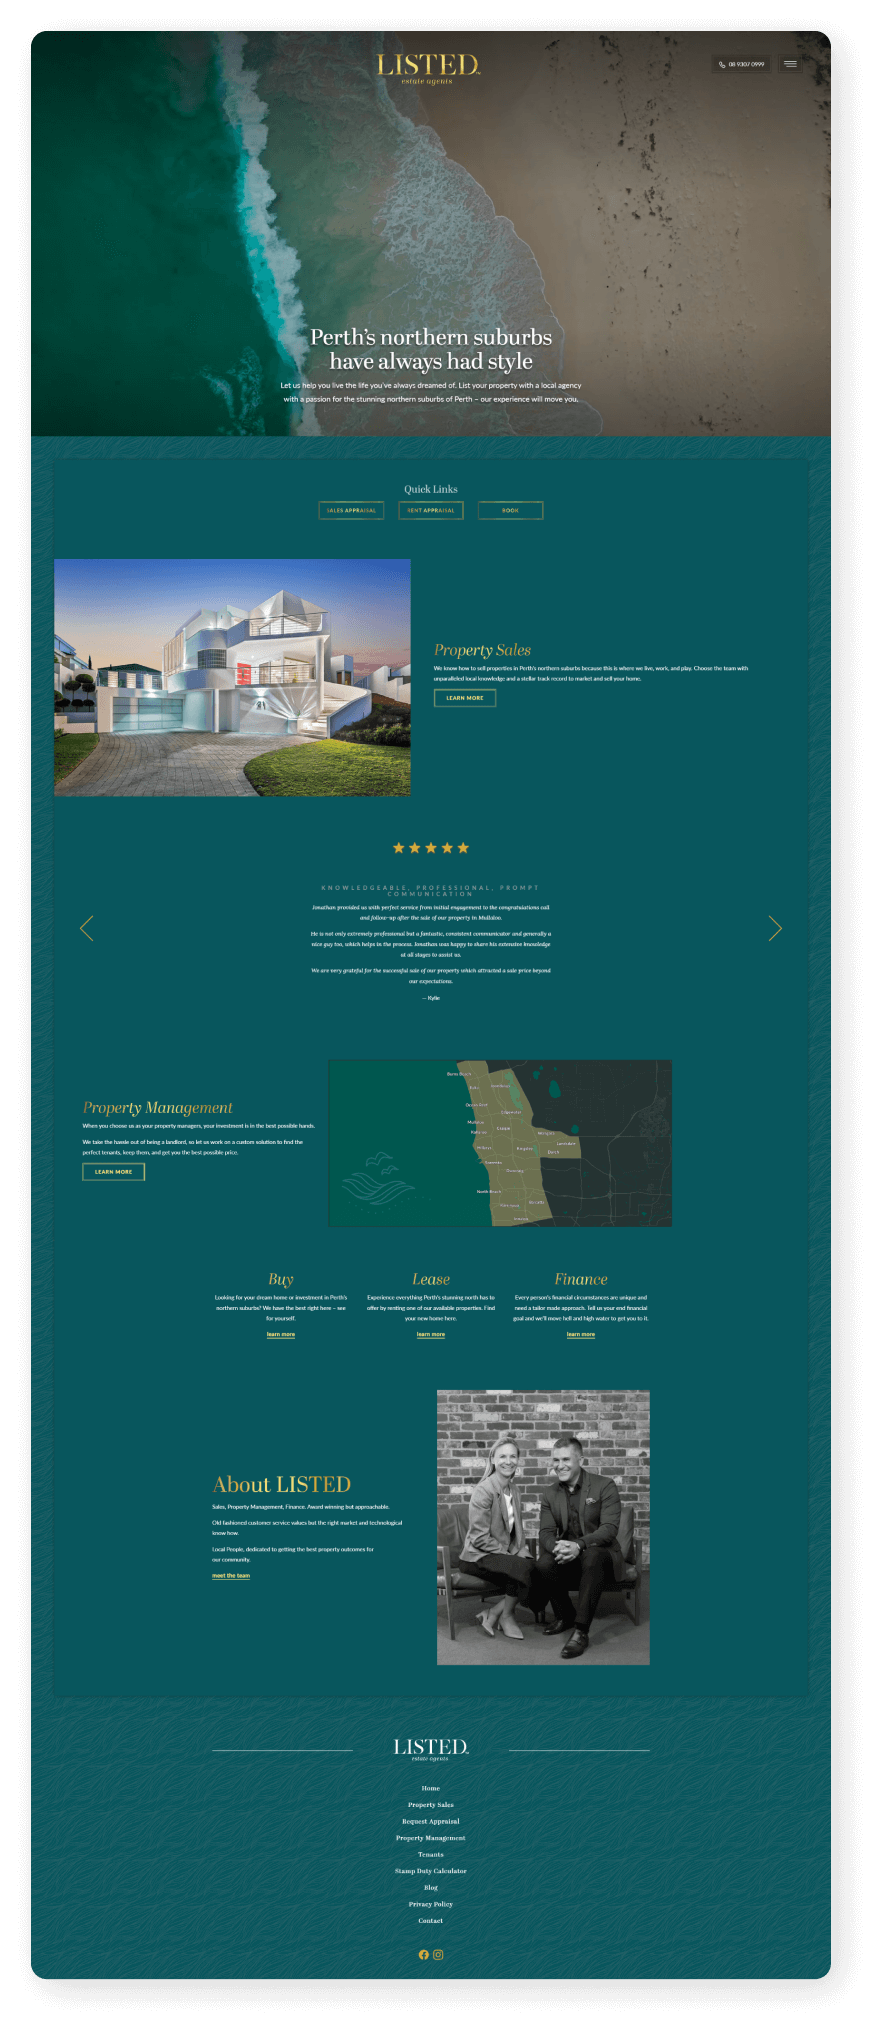 LISTED Estate Agents web design - home page